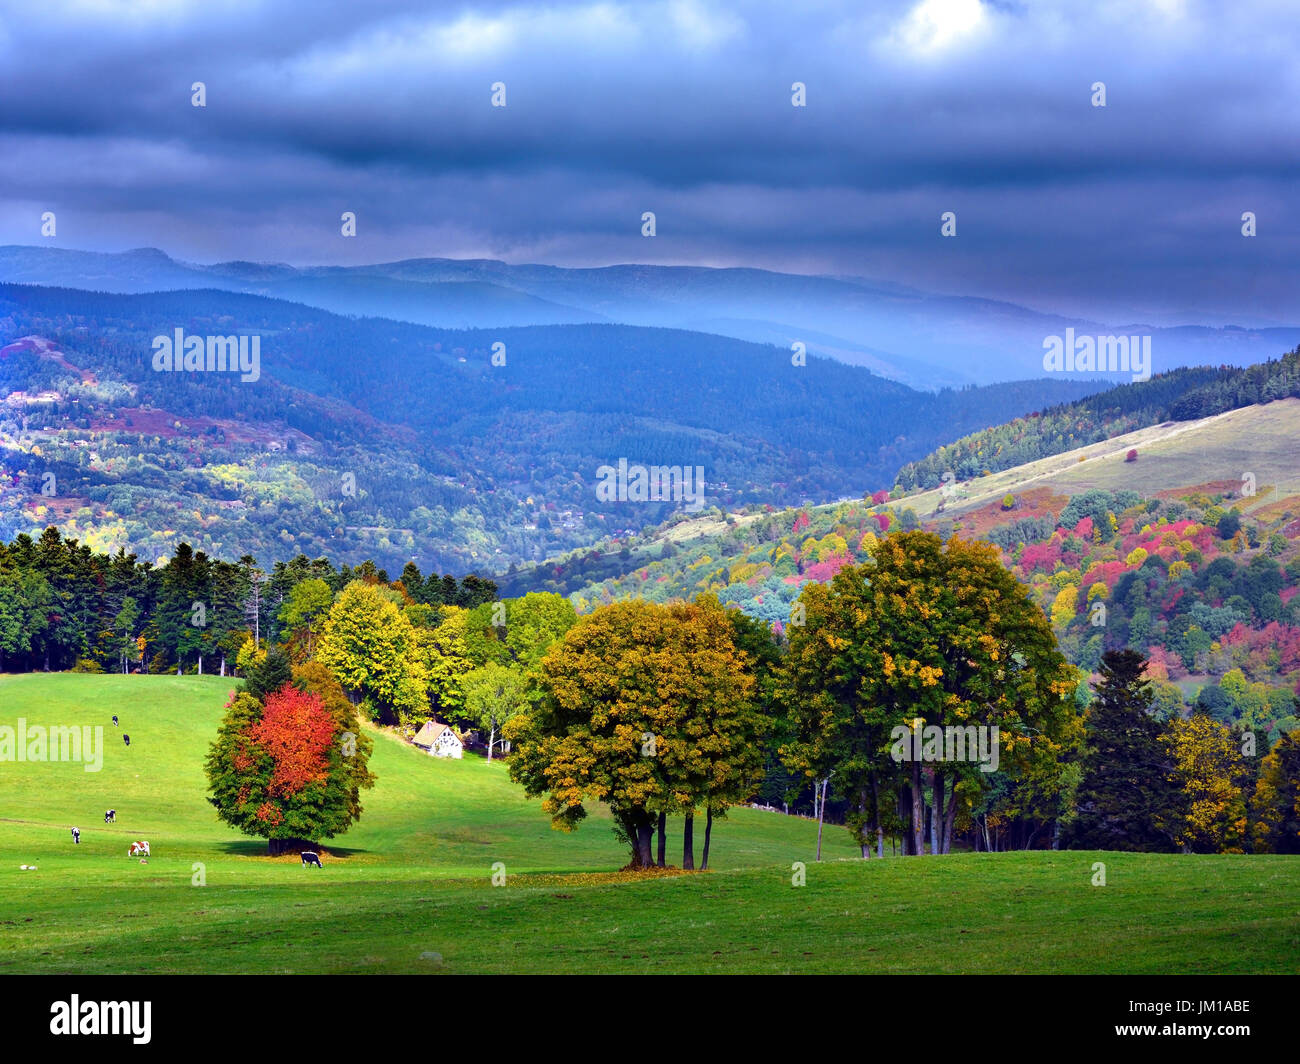 An autumn view of the Ballons des Vosges nature park in Alsace, France Stock Photo